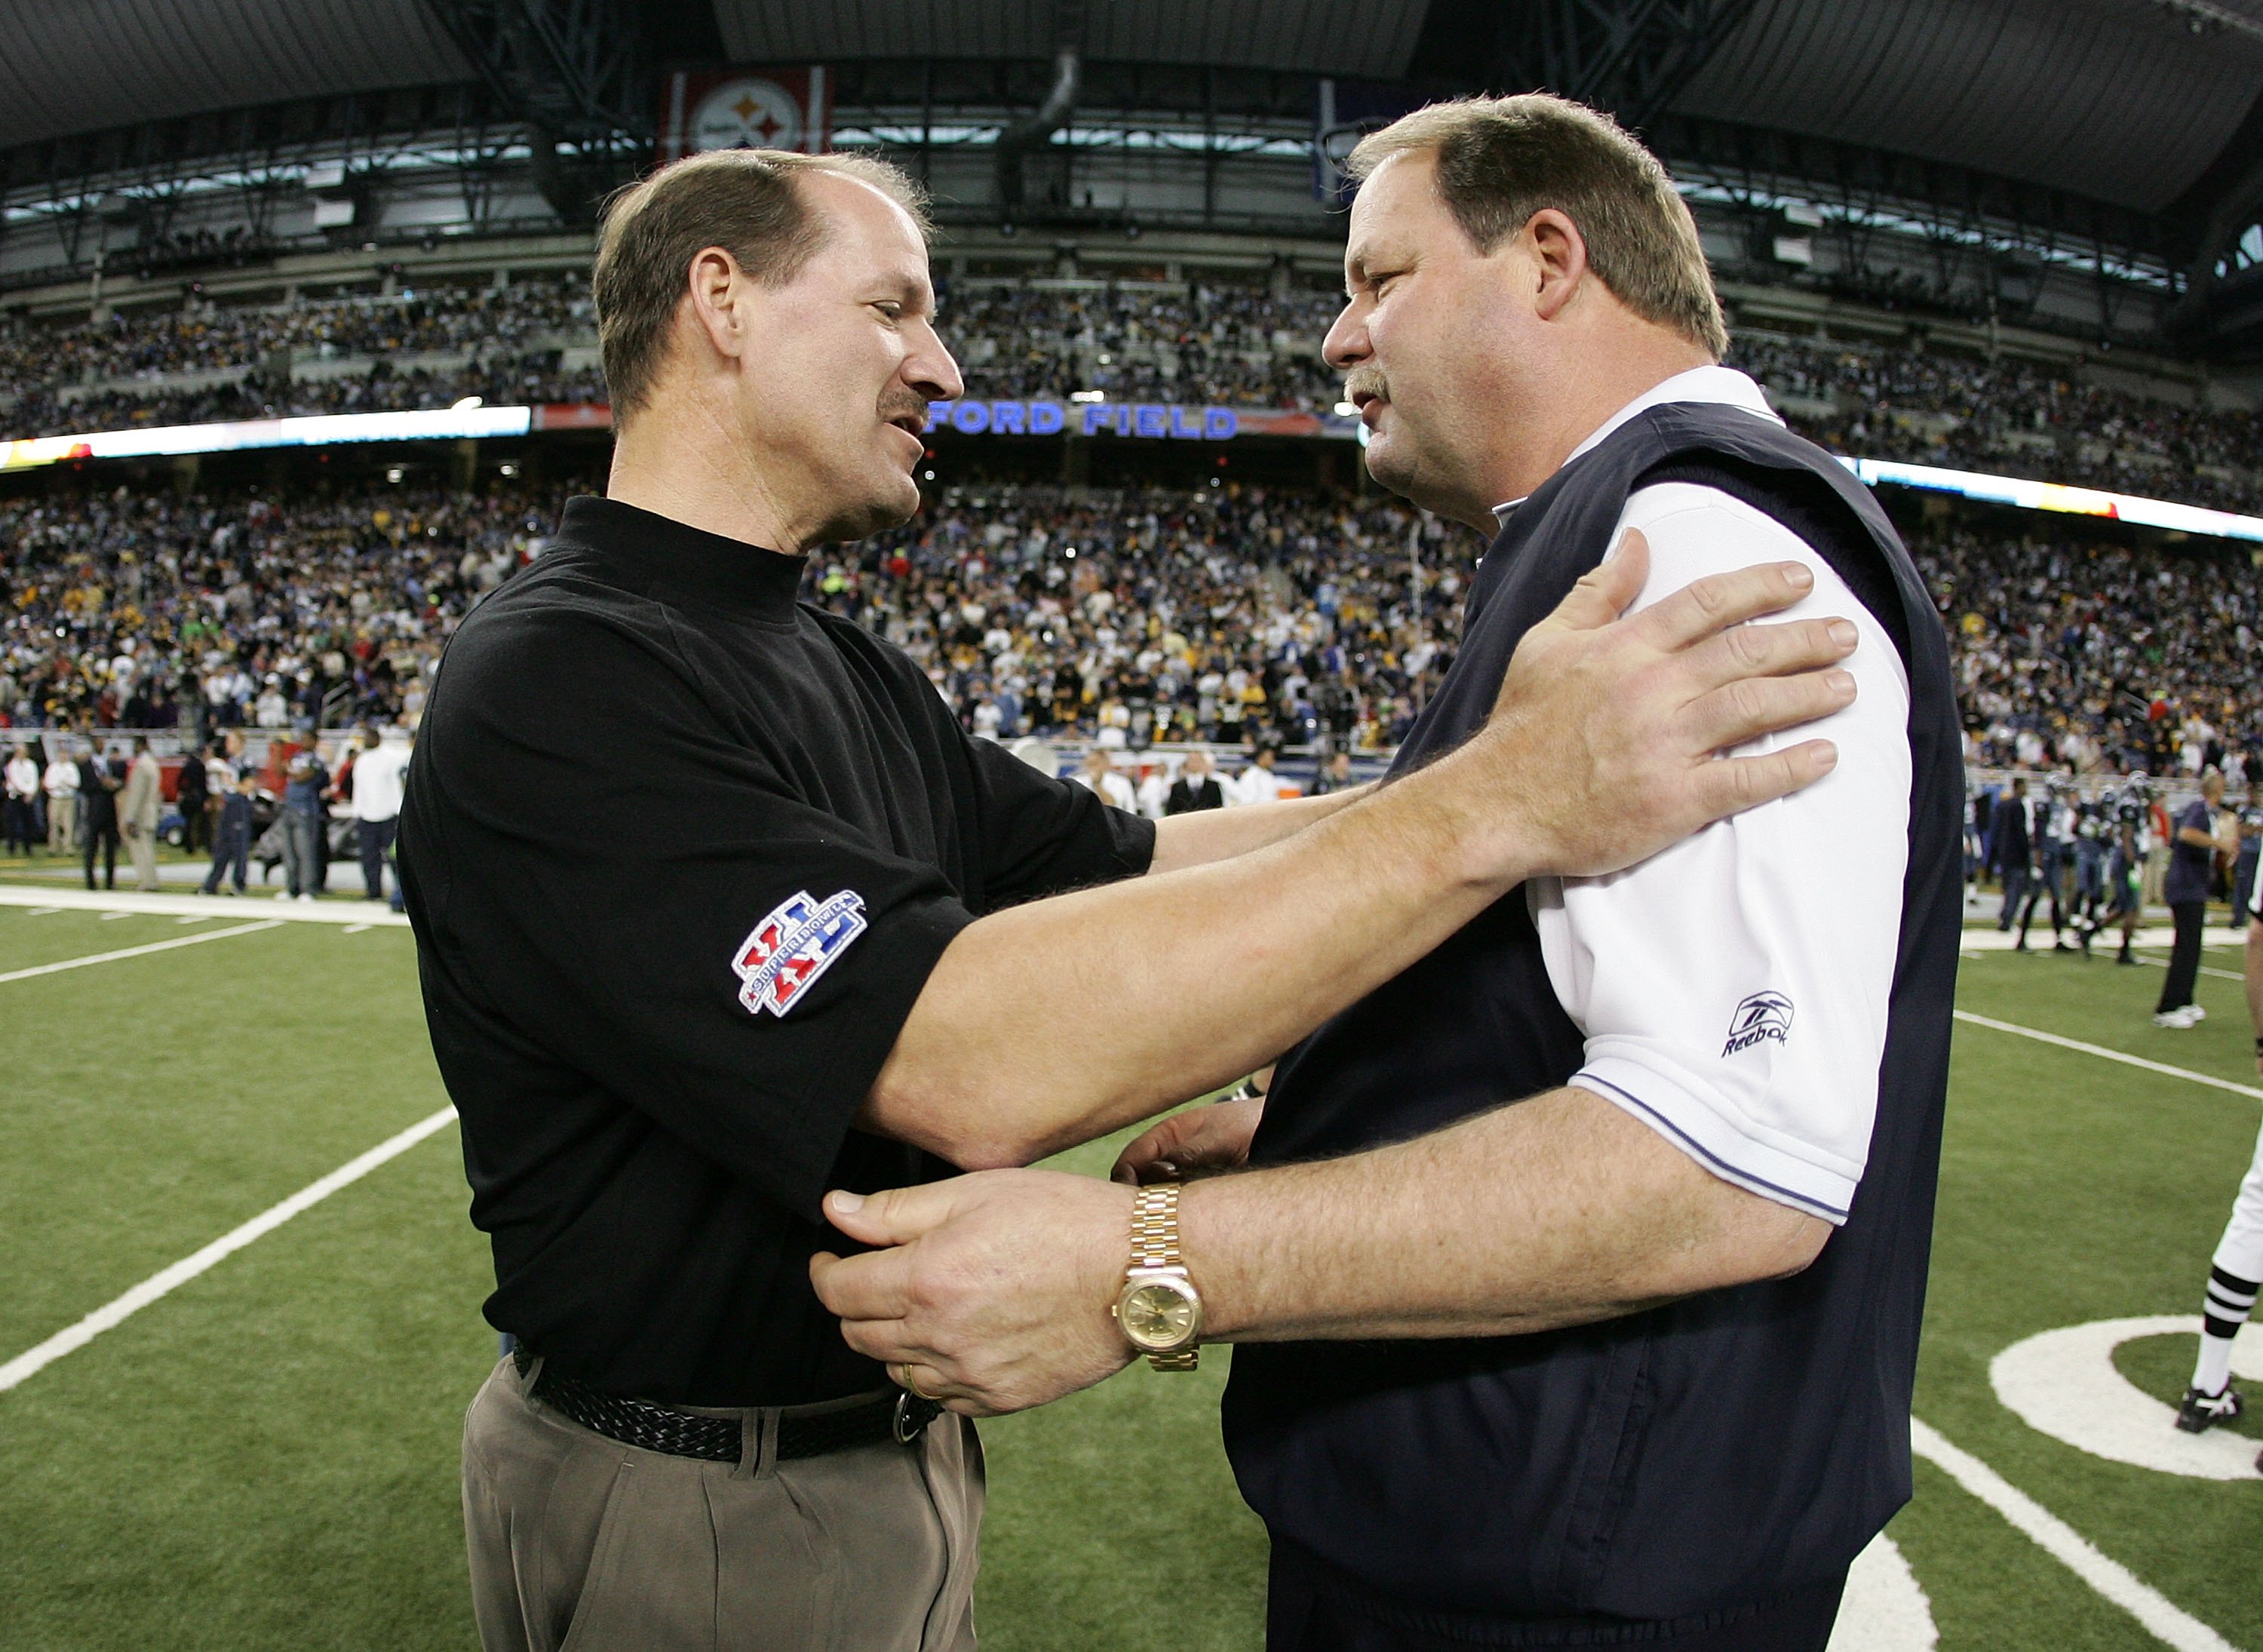 DETROIT - FEBRUARY 05:  Head coach Bill Cowher of the Pittsburgh Steelers shakes hands with head coach Mike Holmgren of the Seattle Seahawks before the start of Super Bowl XL at Ford Field on February 5, 2006 in Detroit, Michigan.  (Photo by Harry How/Get